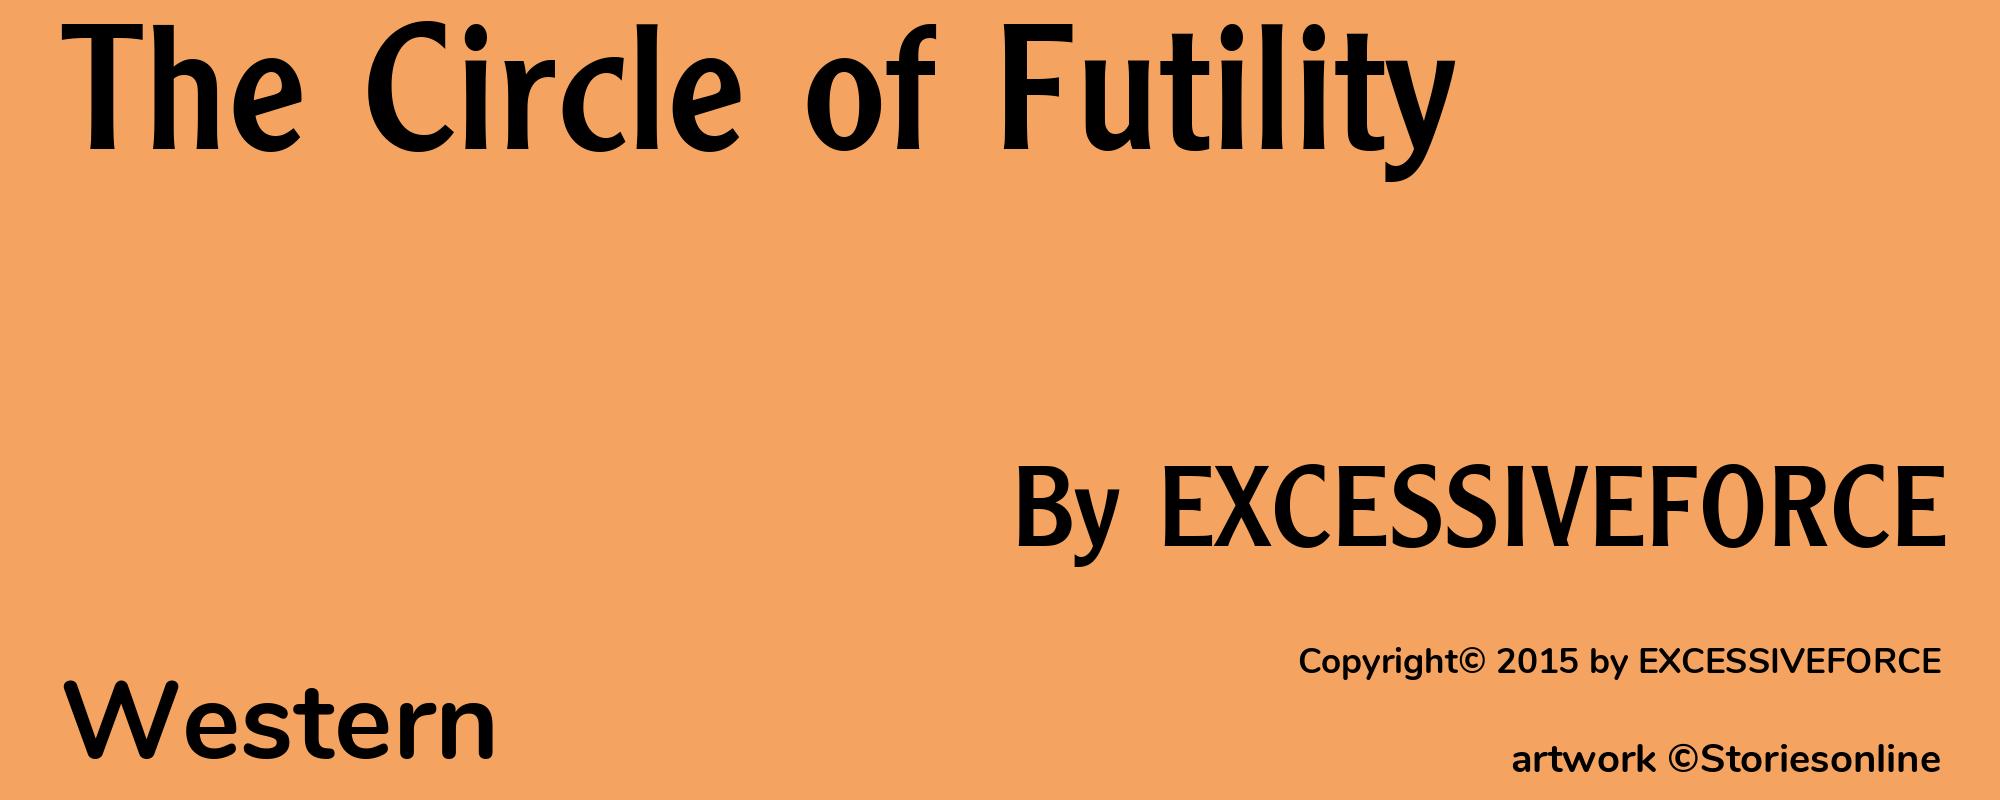 The Circle of Futility - Cover